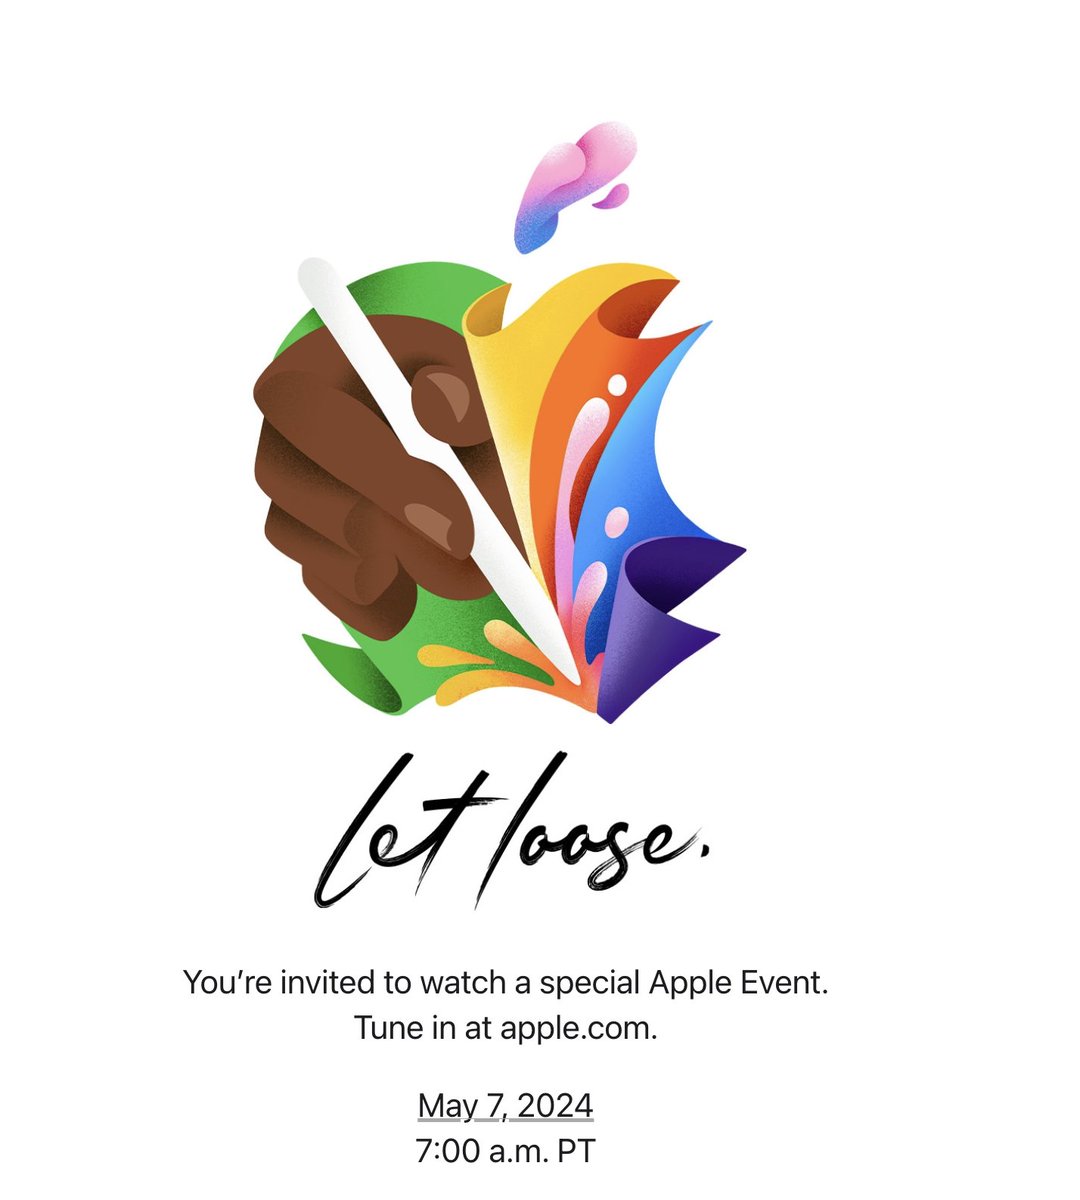 Apple just dropped a May 7th event in my inbox. Livestream. Probably iPad related